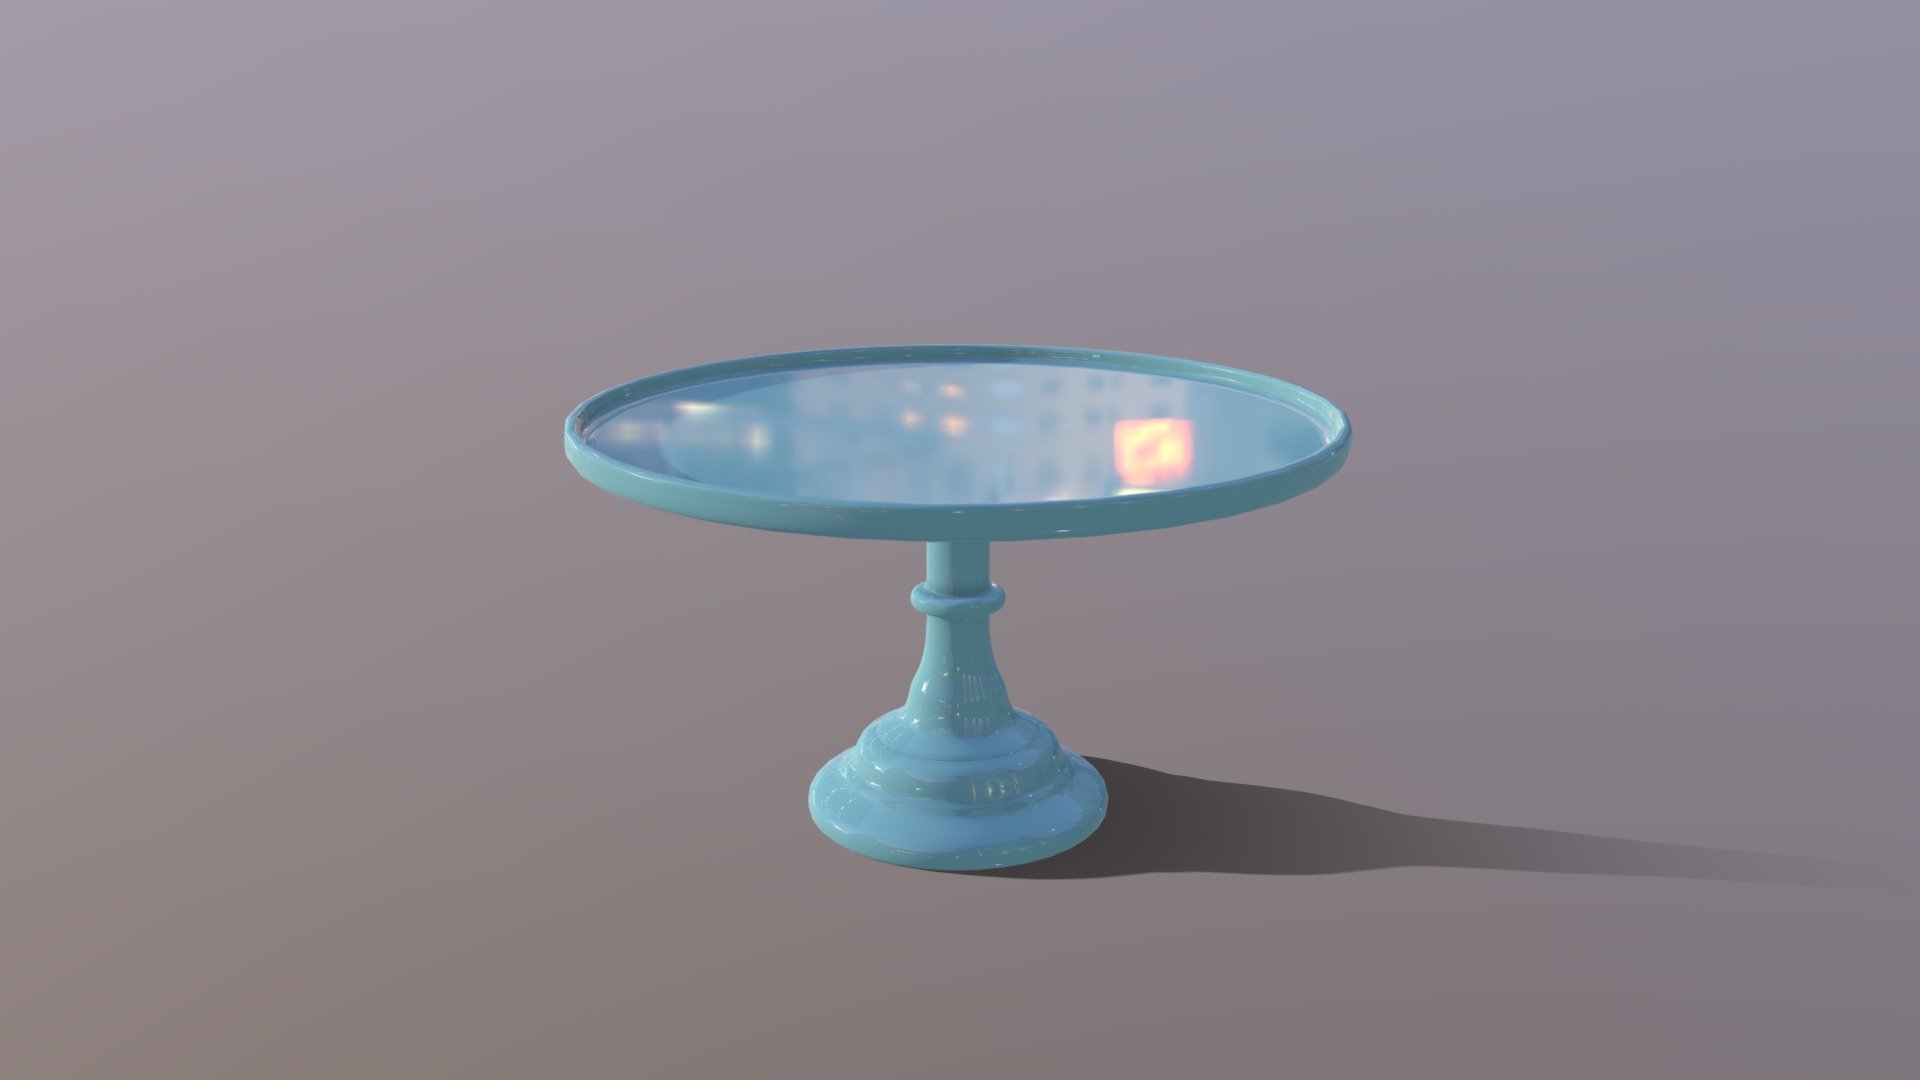 Mosser Glass cake stand is most iconic cake stand in the UK, 3D modeled for CG world by Cakesburg premium cake shop (https://cakesburg.co.uk/) 3d model